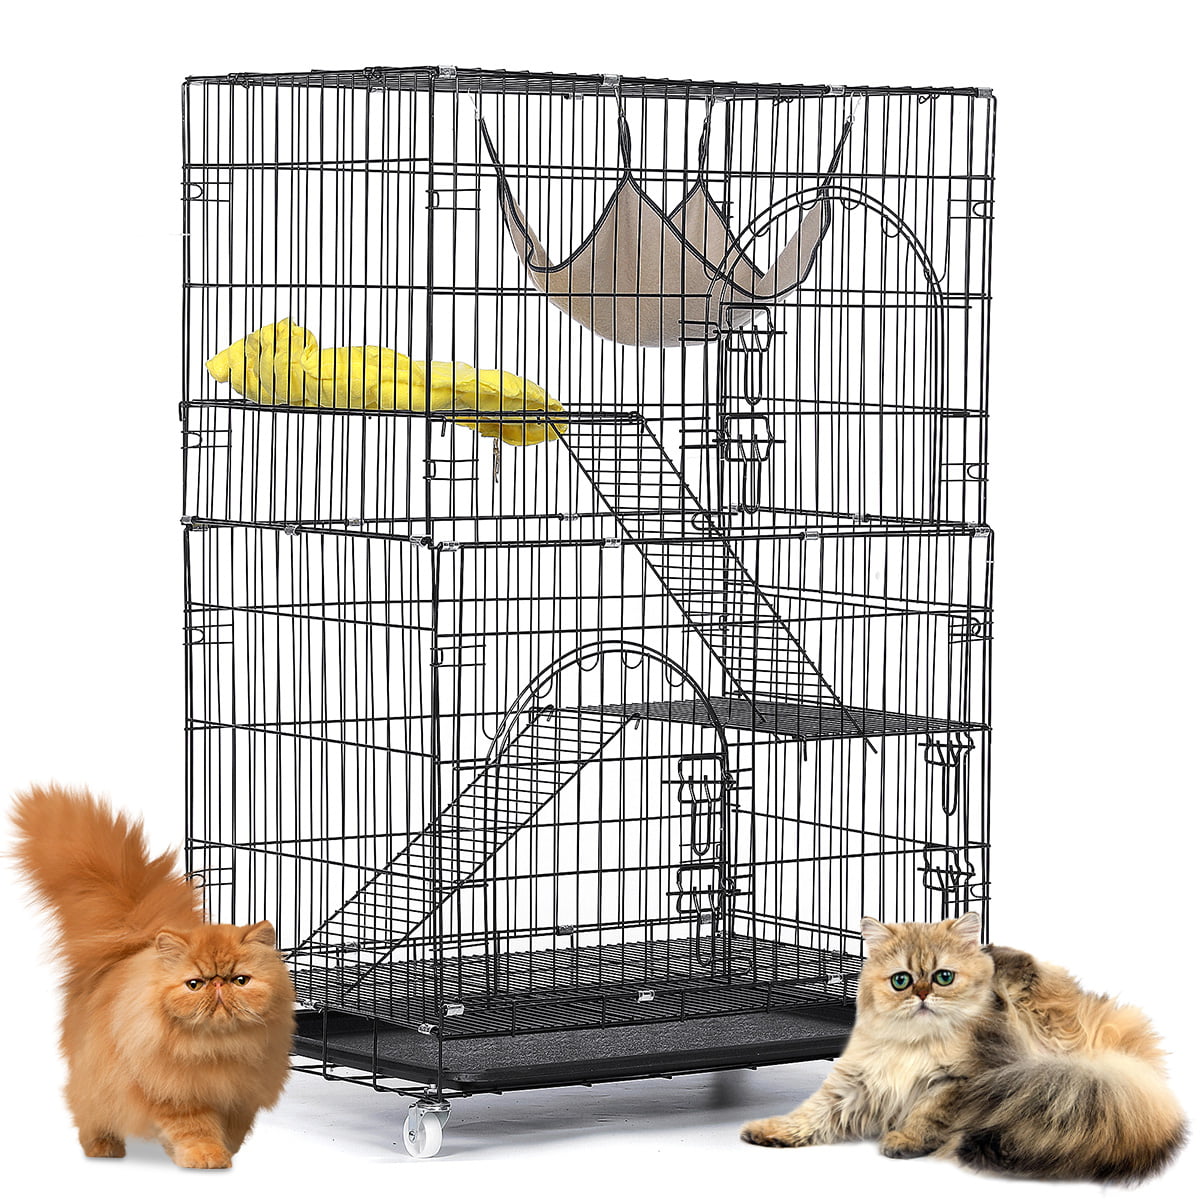 Folding Pet Cat Cage Home Portable 3-Tier Pet Cage Playpen with Hammock for Kitten Cat Ferret White 